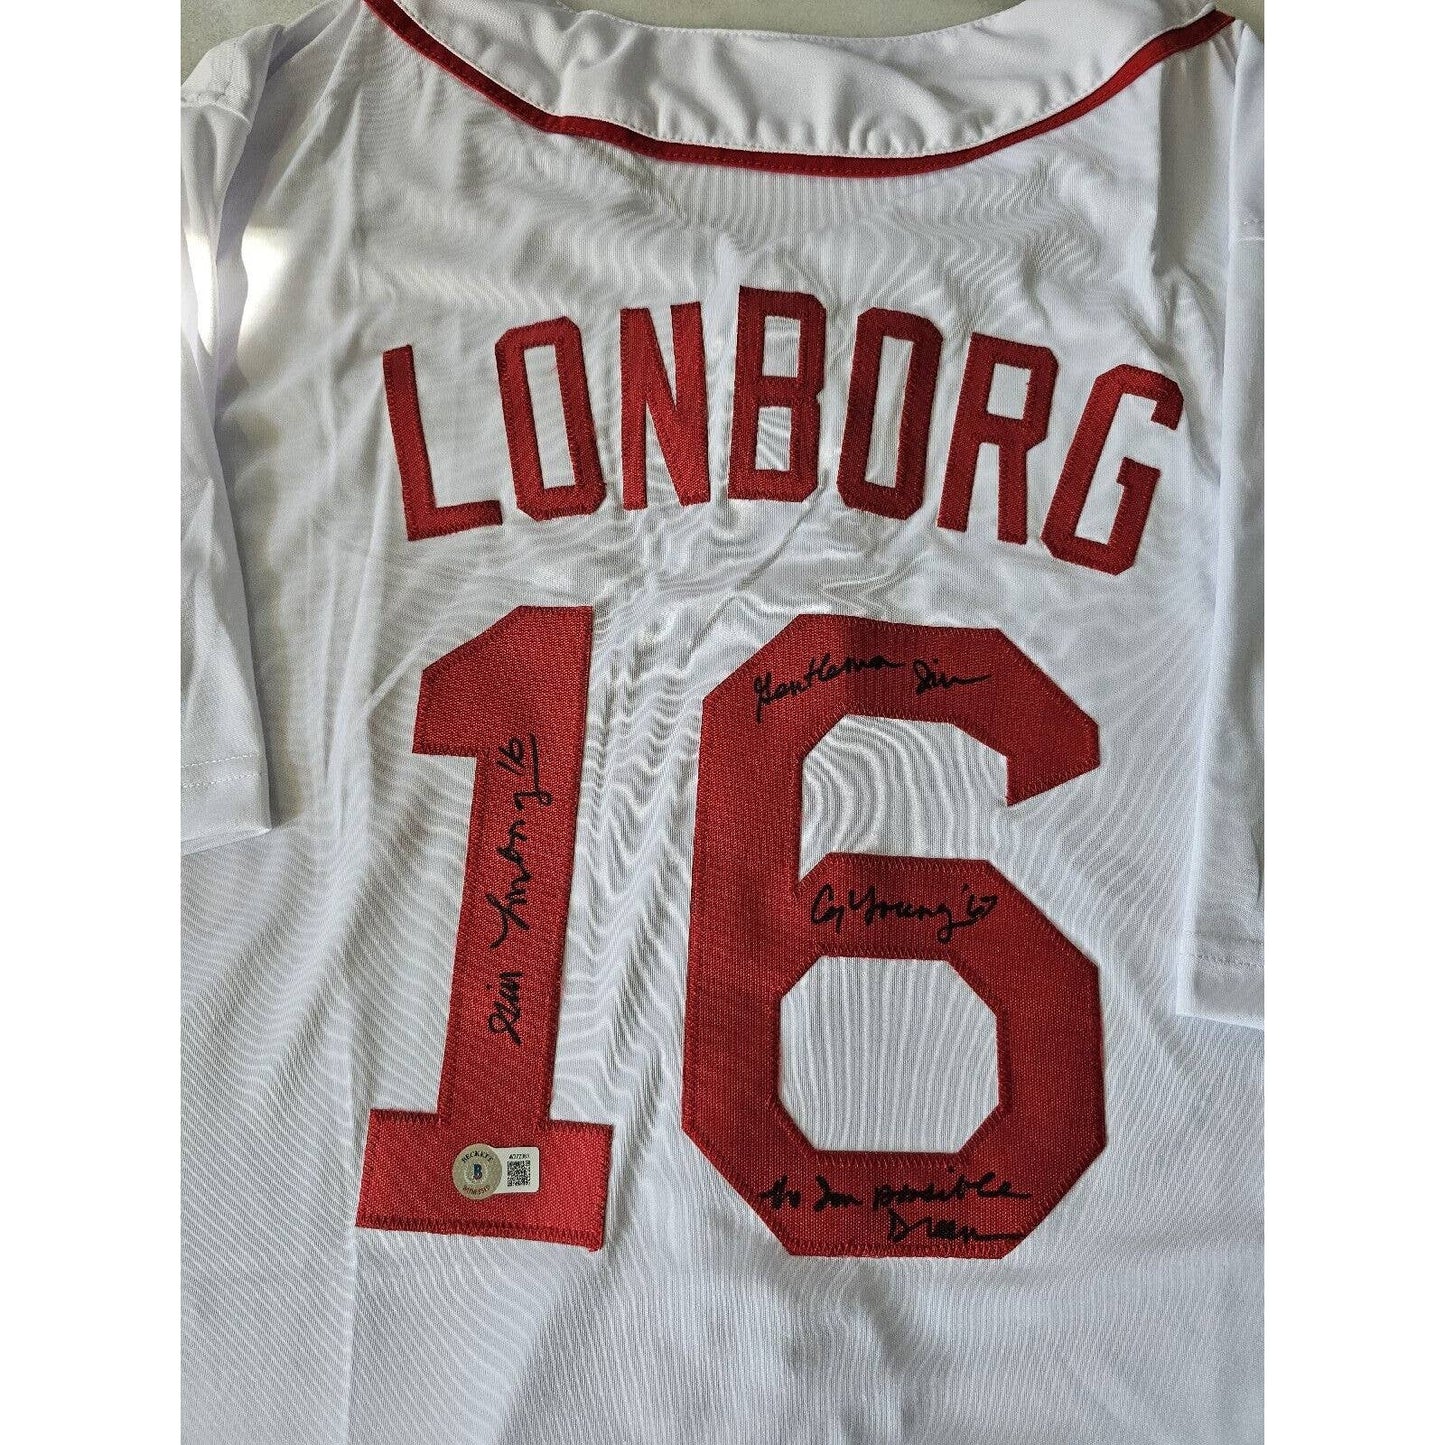 Jim Lonborg Autographed/Signed Jersey Beckett Sticker Boston Red Sox